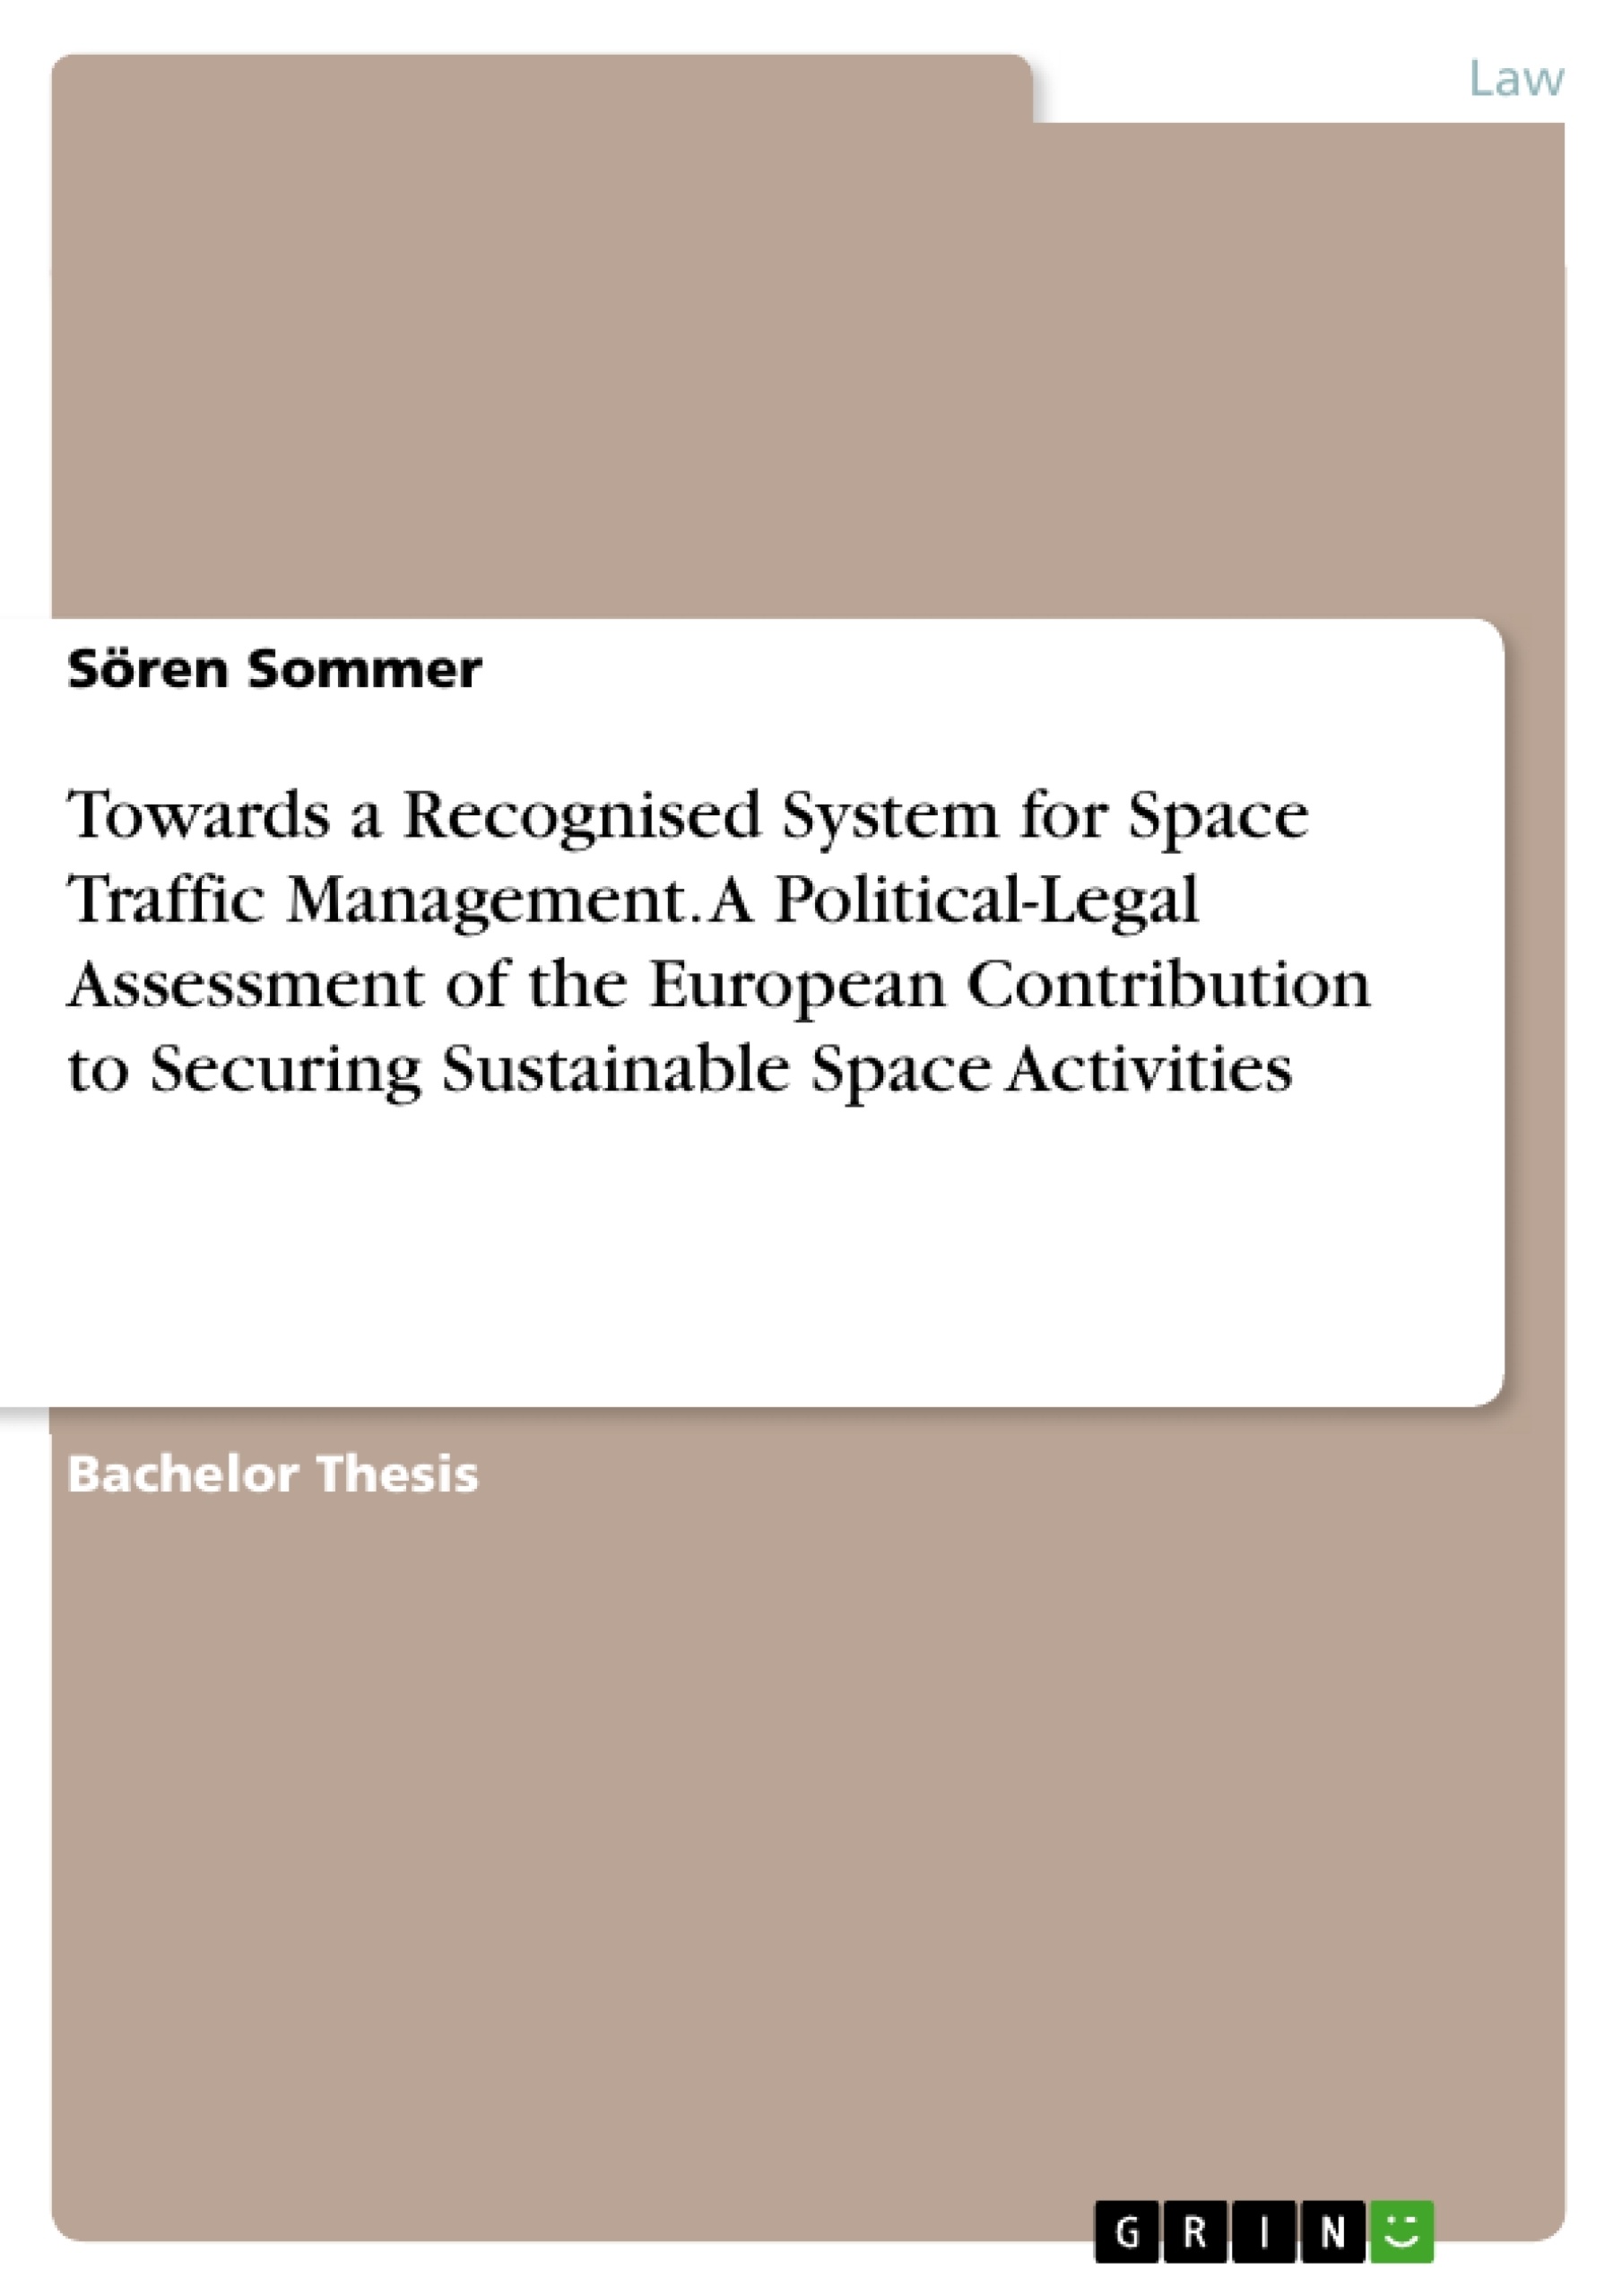 Título: Towards a Recognised System for Space Traffic Management. A Political-Legal Assessment of the European Contribution to Securing Sustainable Space Activities